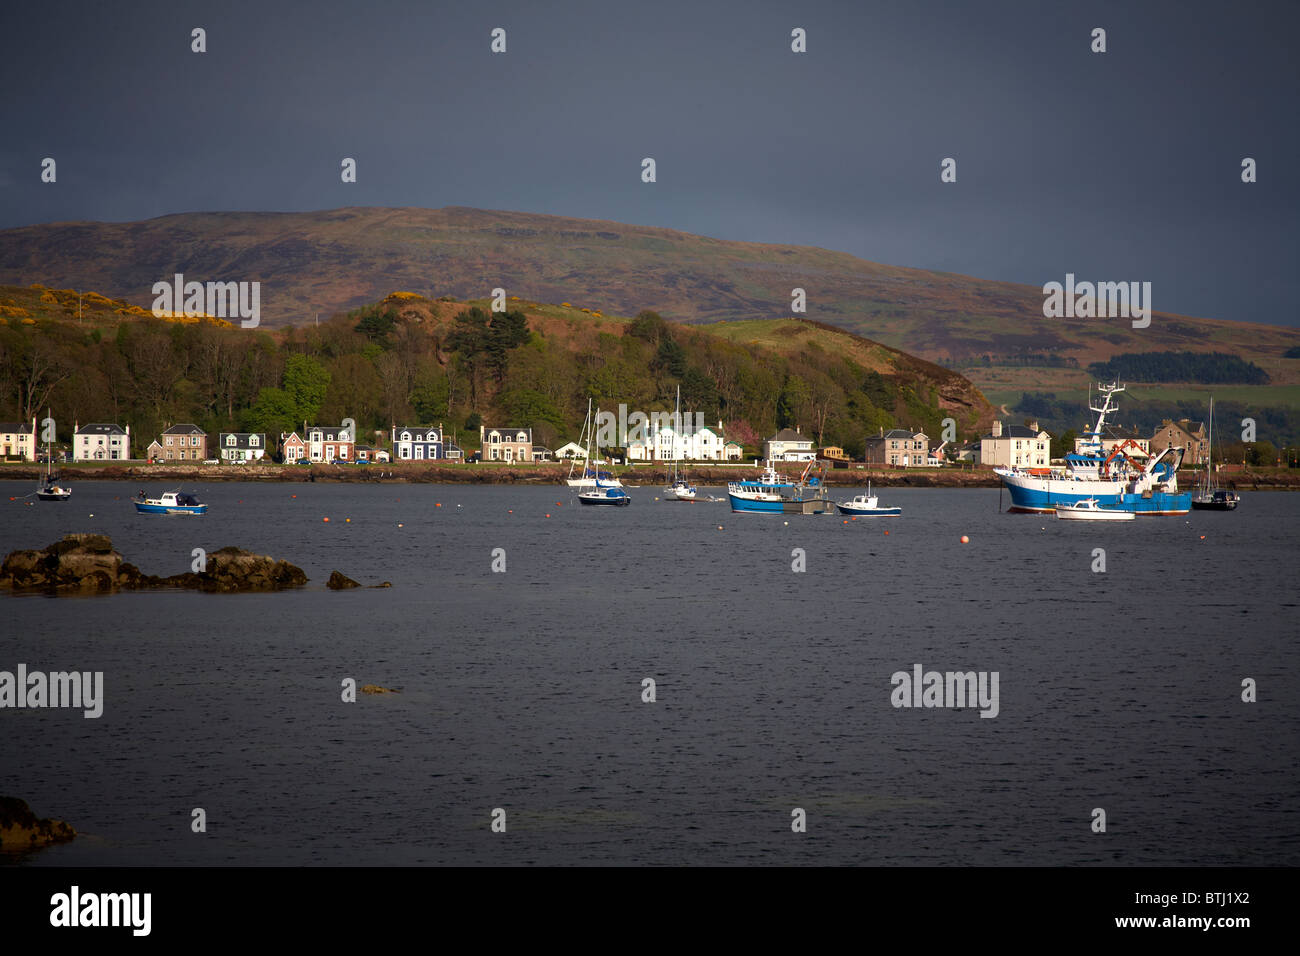 Views of the Seafront at Millport on the Isle of Cumbrae, off the coast of Largs Ayrshire, Scoltland Stock Photo